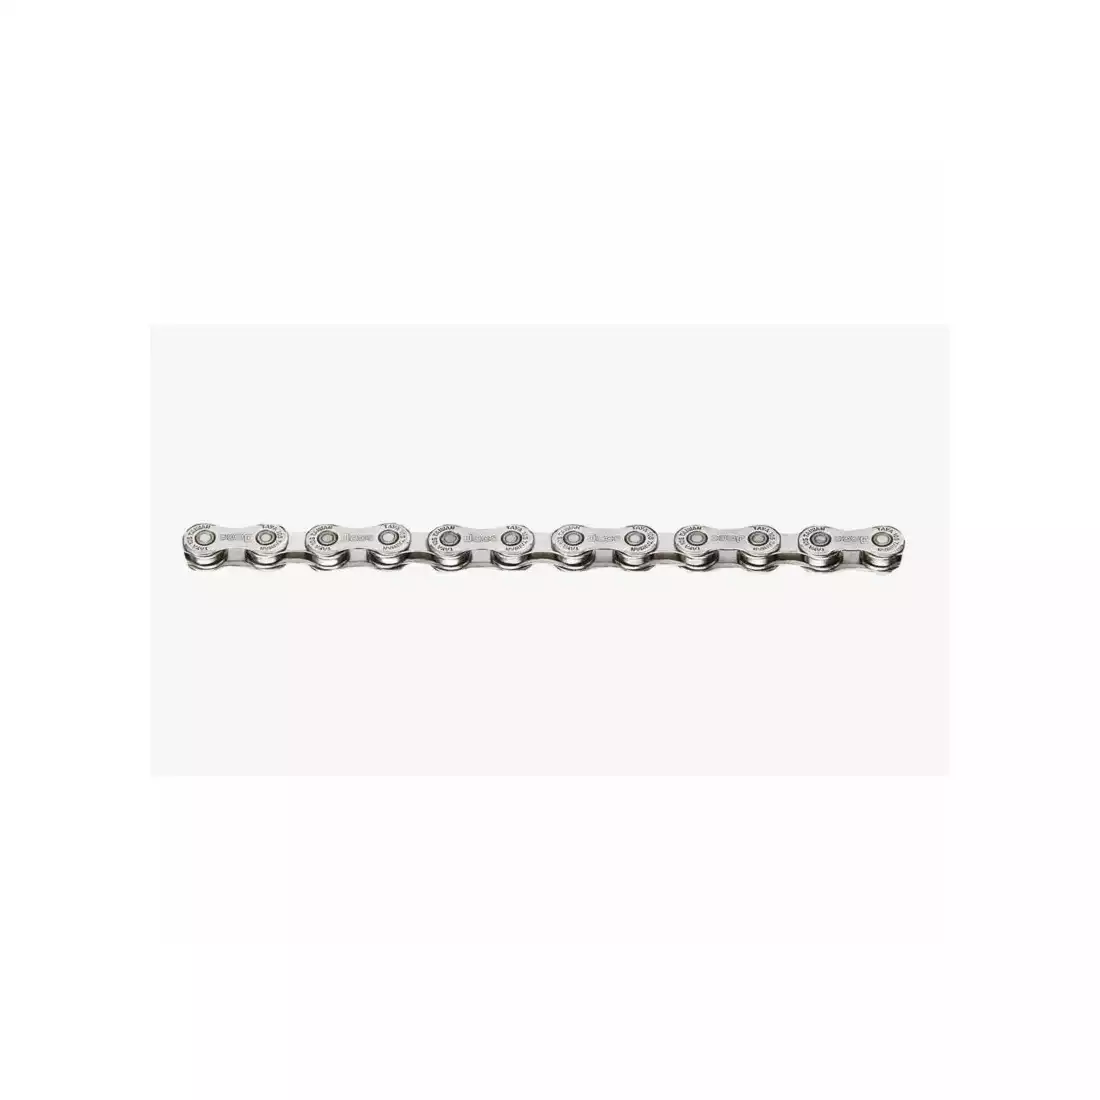 TAYA OCTO Bicycle chain 8-7 speed, 116 links, silver